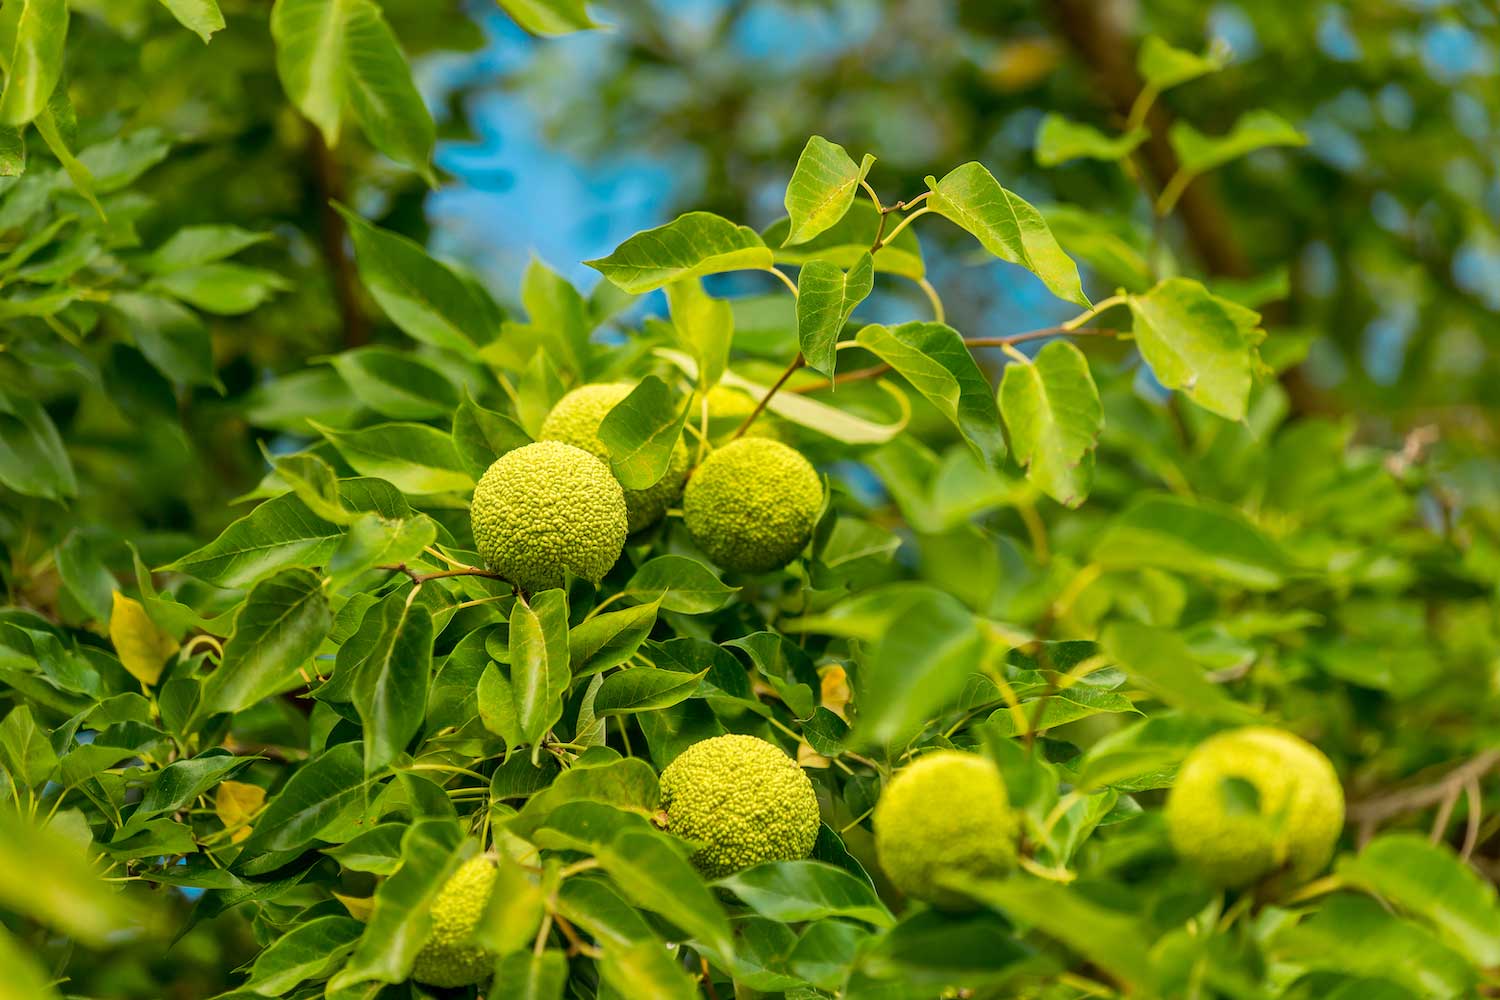 An Osage orange tree with several of the large fruits hanging from its branches.